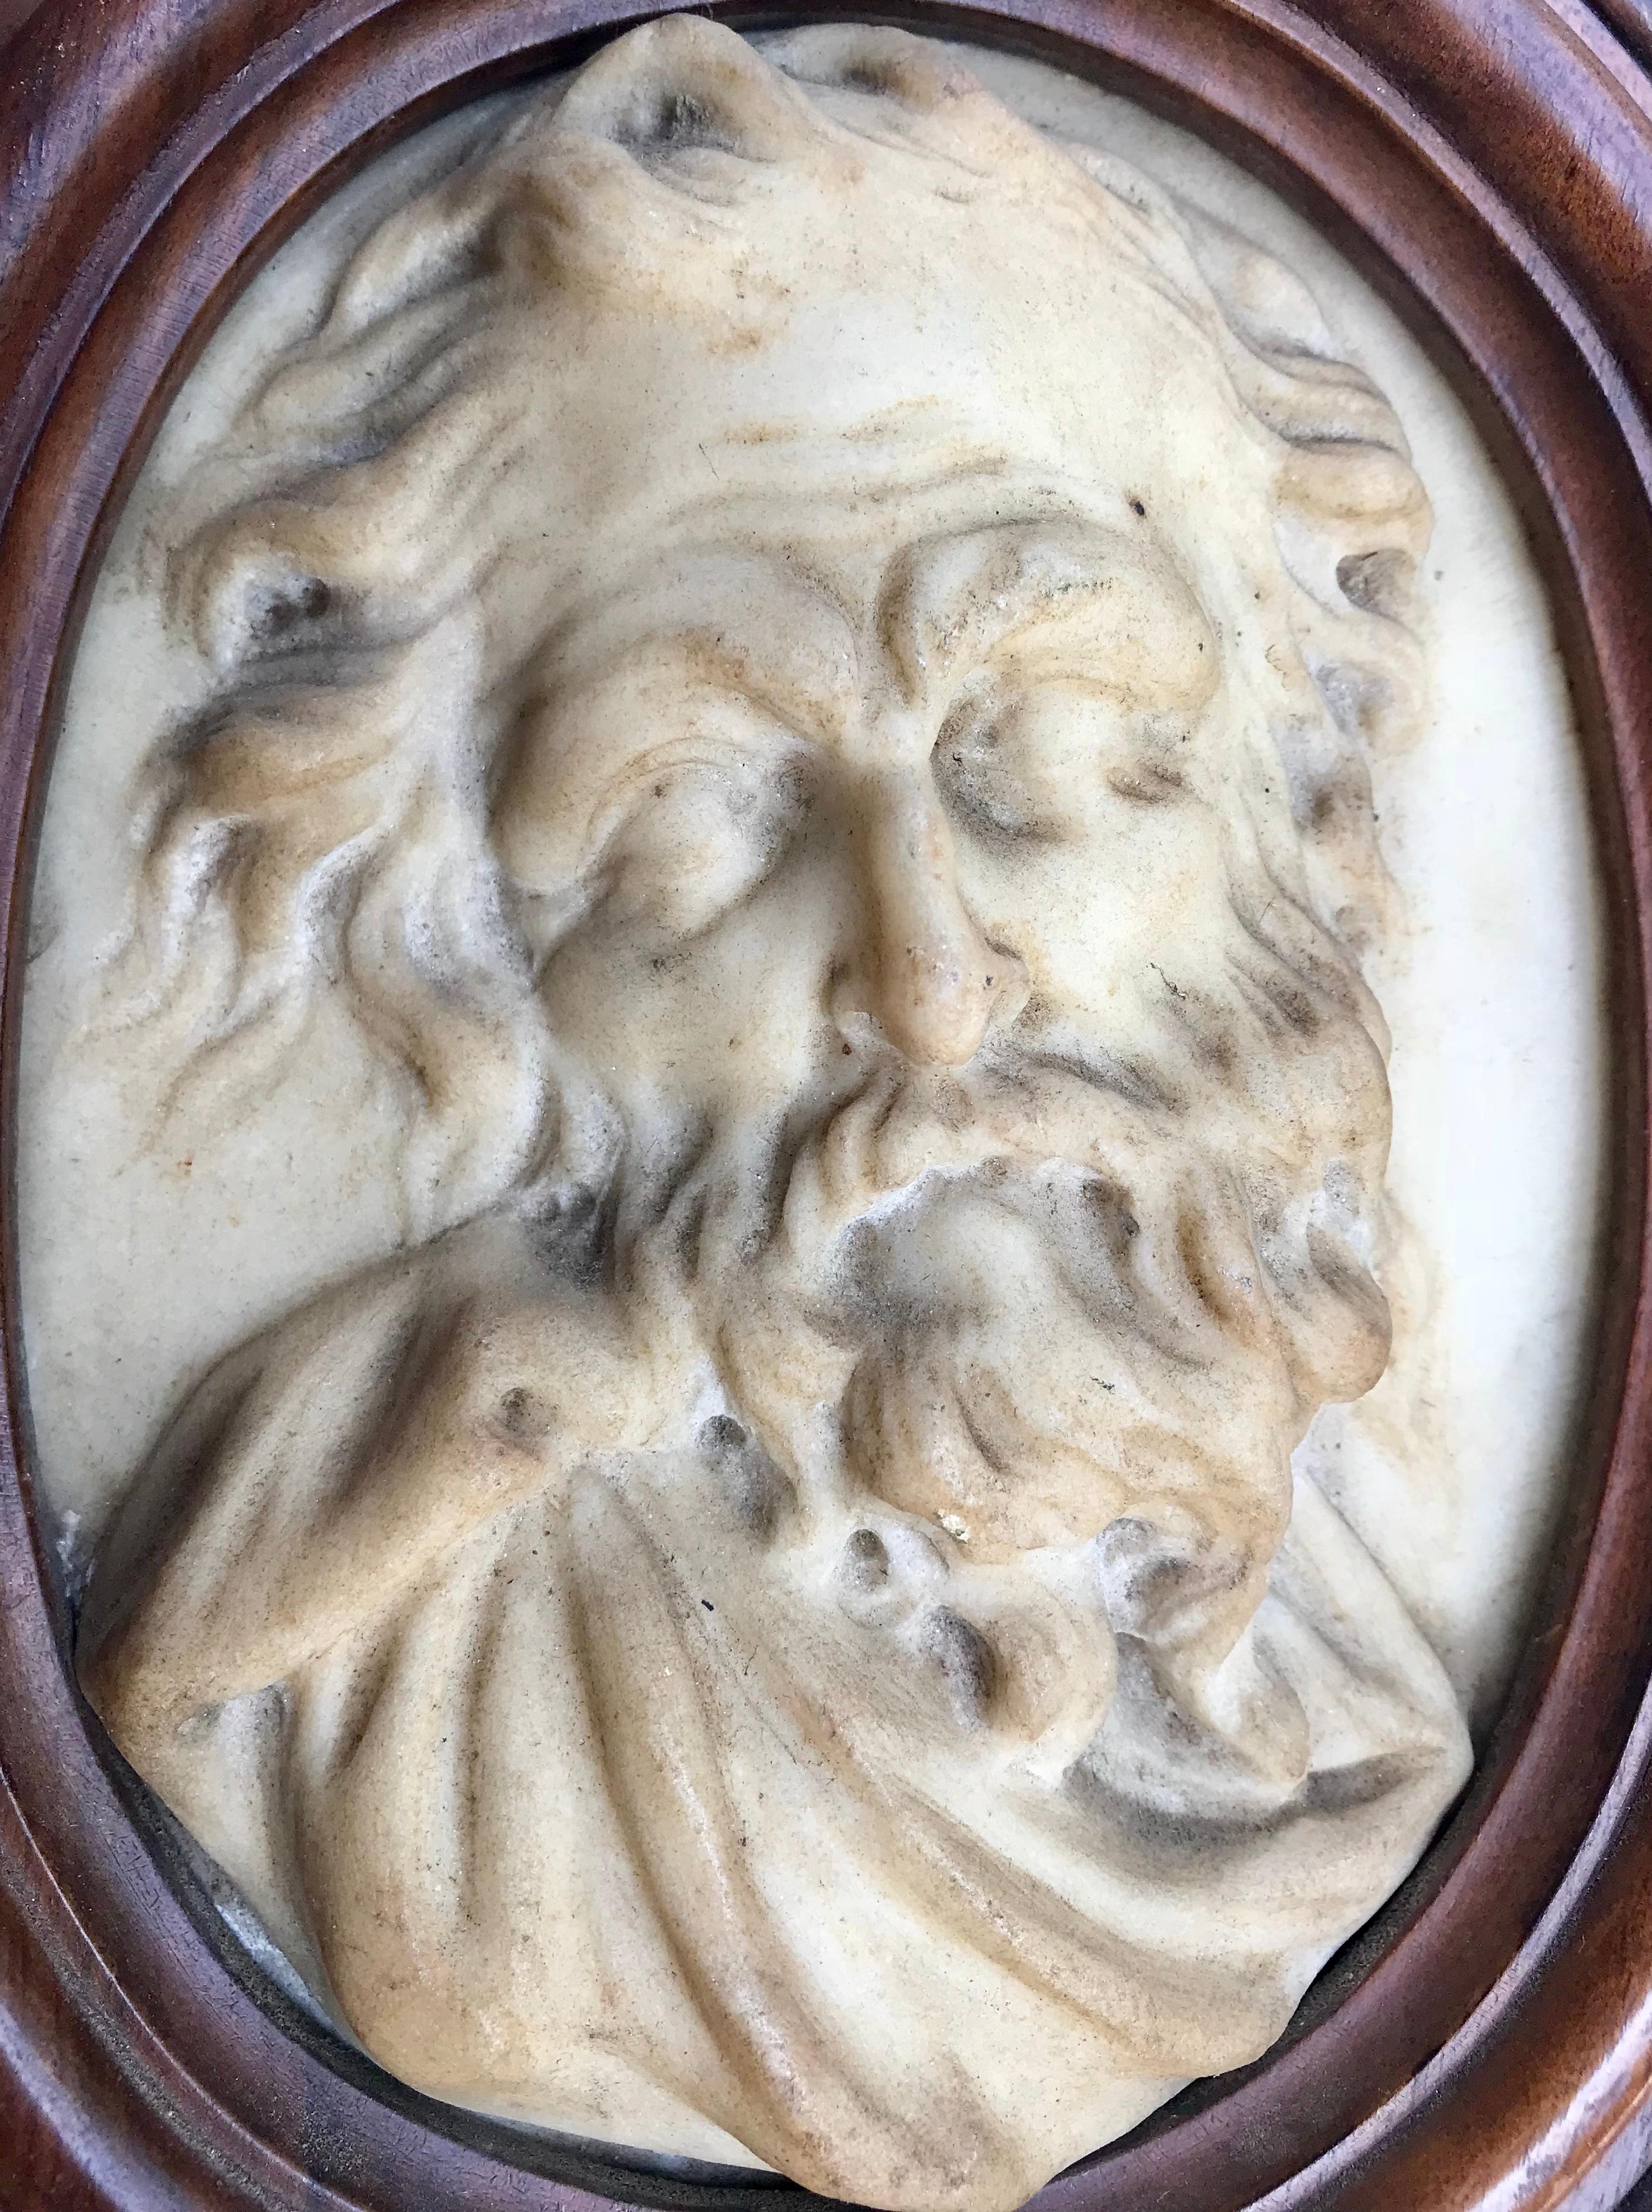 Italian carved marble oval relief Cameo portrait, 17th century. From the workshop of Gian Lorenzo Bernini (1598 - 1680) Rome.

This is a masterpiece. The portrait of a bearded man is carved in high relief in white carrara marble. It is created in